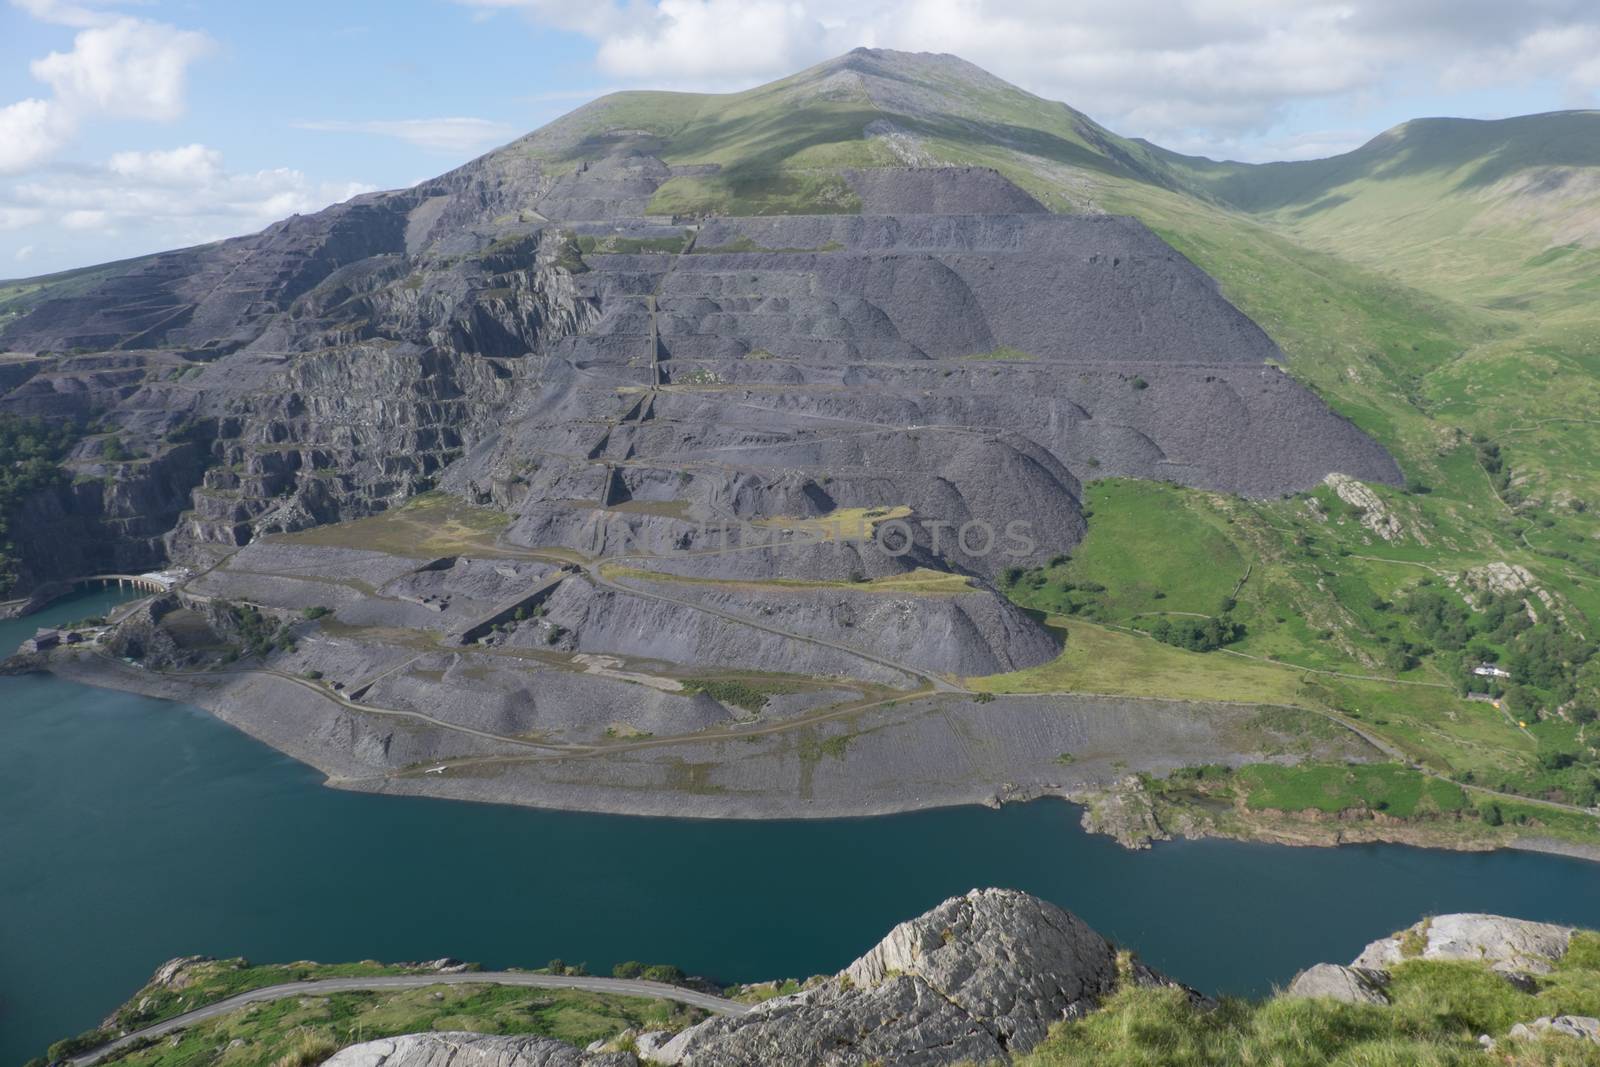 A view looking down to Llyn Peris and the expance of the Dinorwic slate quarry workings on the flank of the mountain Elidir Fawr, Llanberis, Gwynedd, Wales, UK.